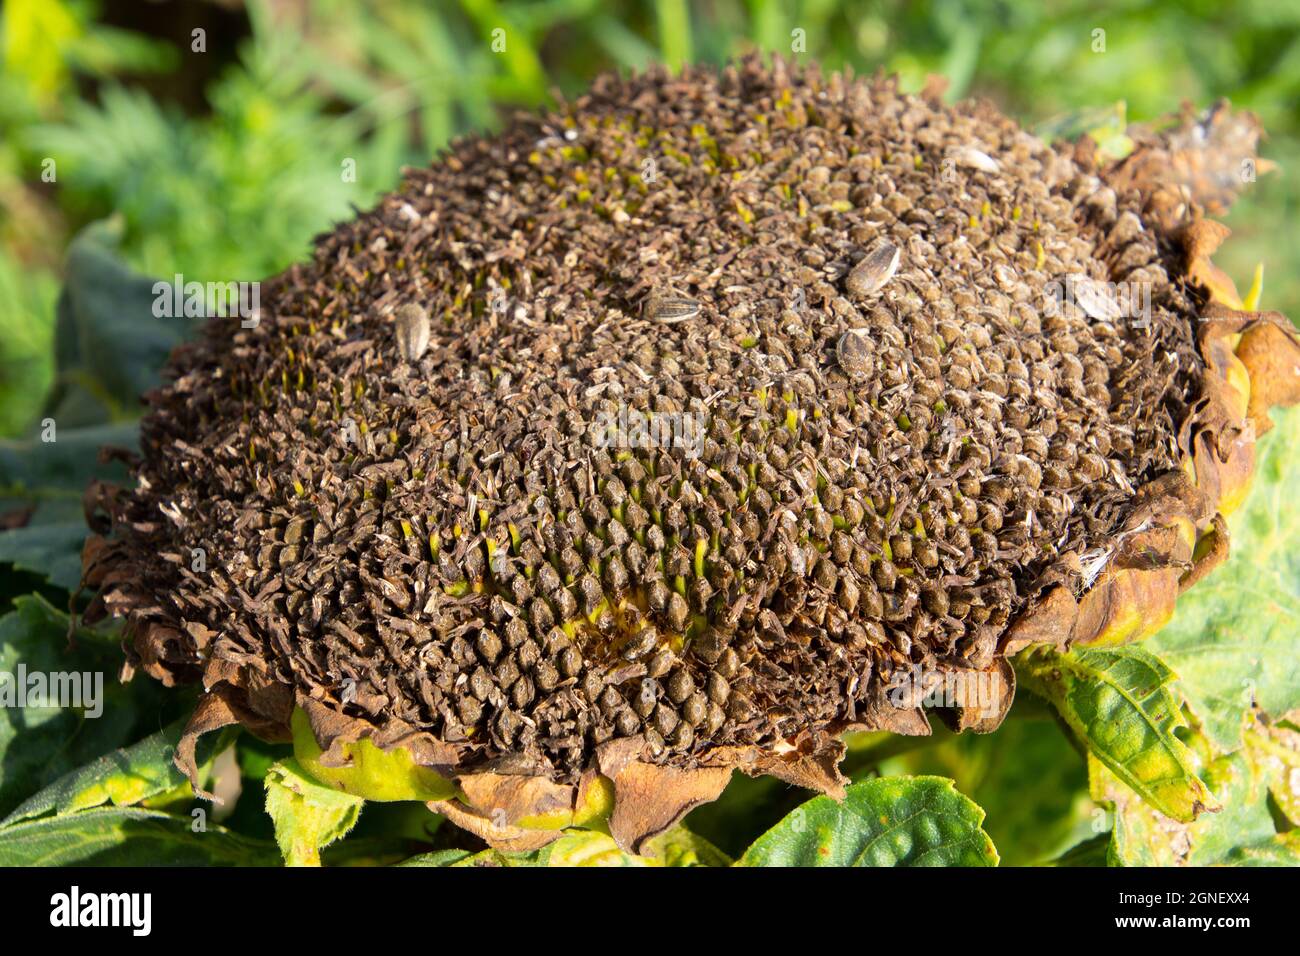 Close up of a dry disc of a sunflower with seeds Stock Photo